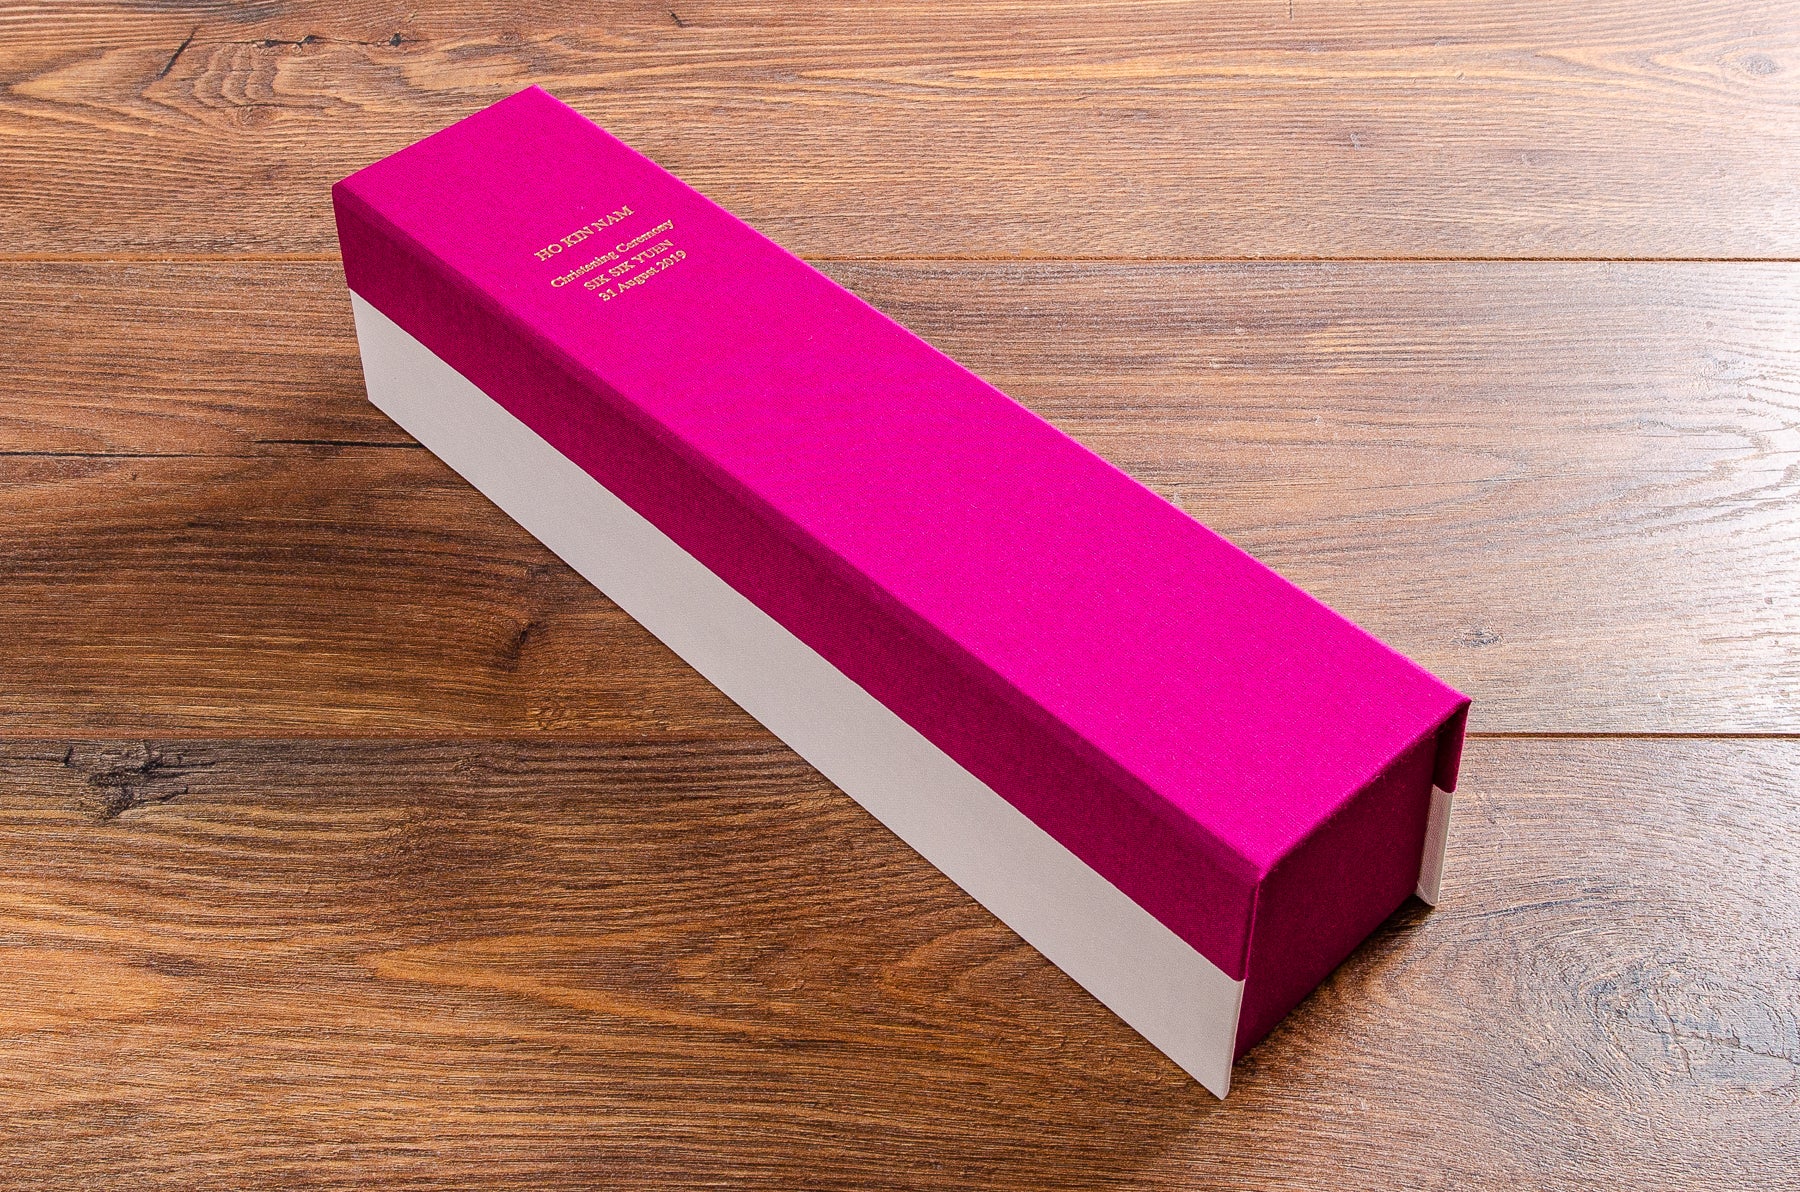 Bespoke christening box with gold foil stamped cover 